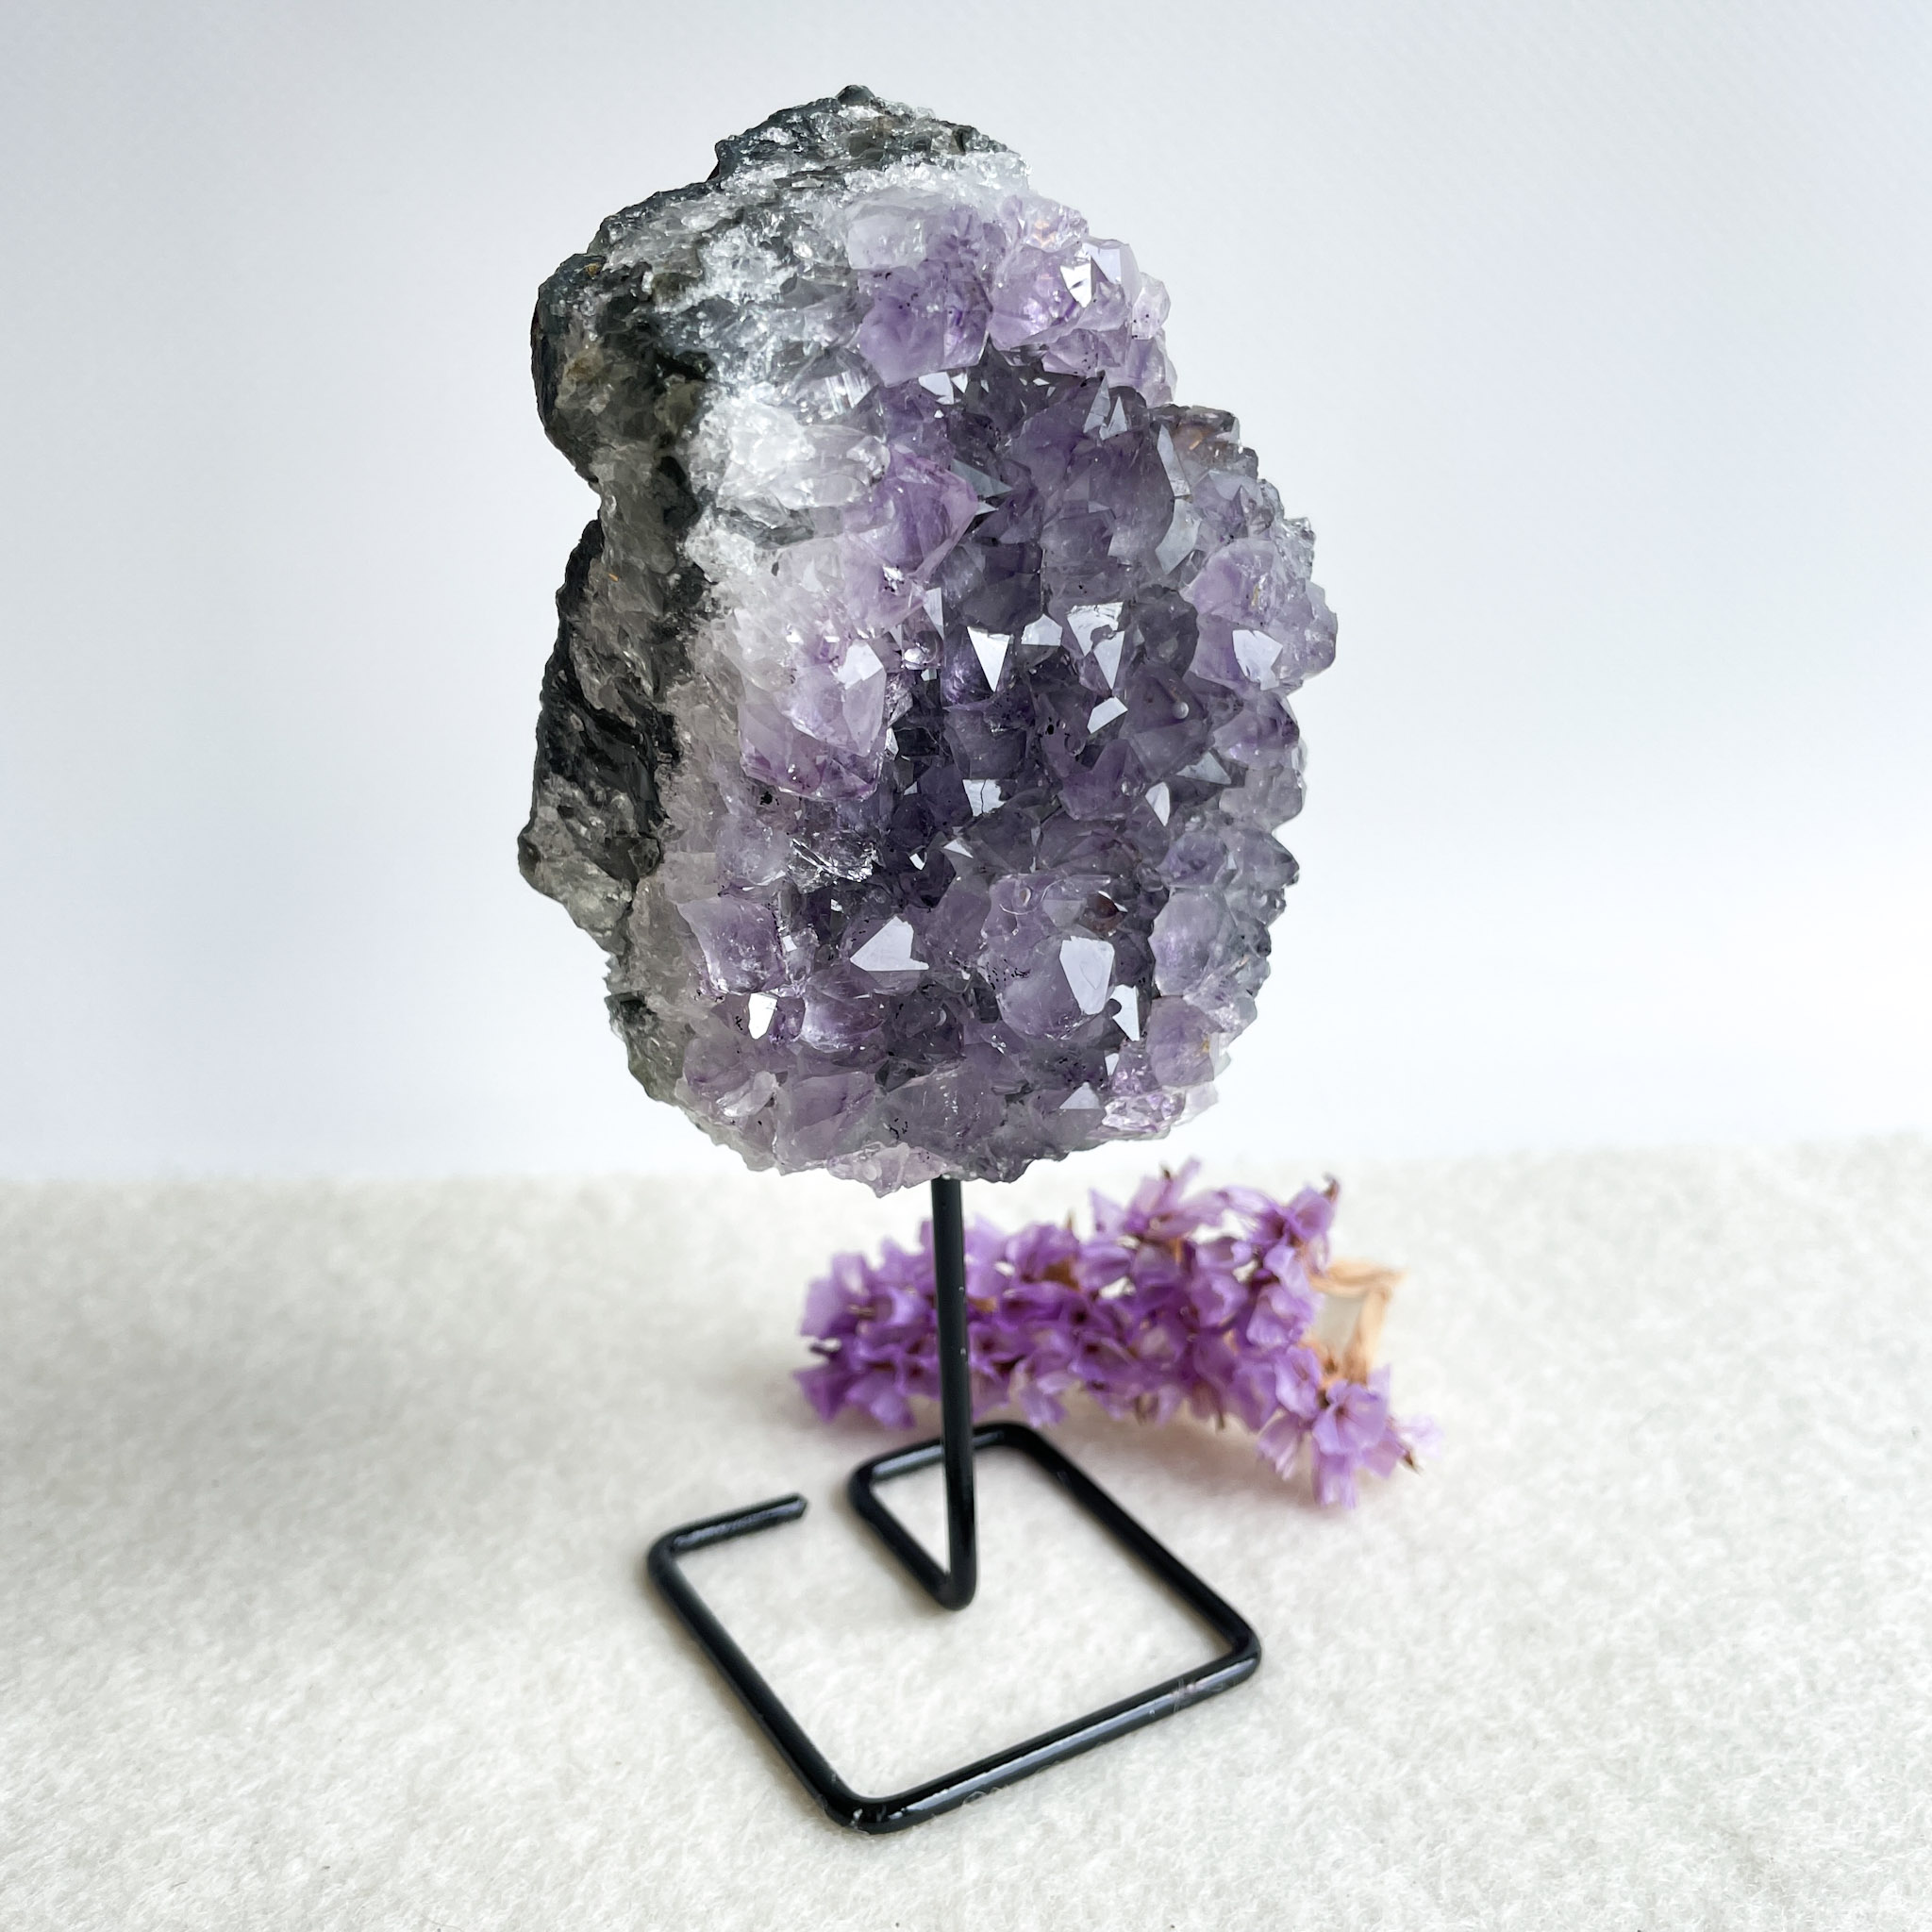 A large amethyst geode on a black metal stand with small purple flowers beside it, placed on a textured white surface against a white background.